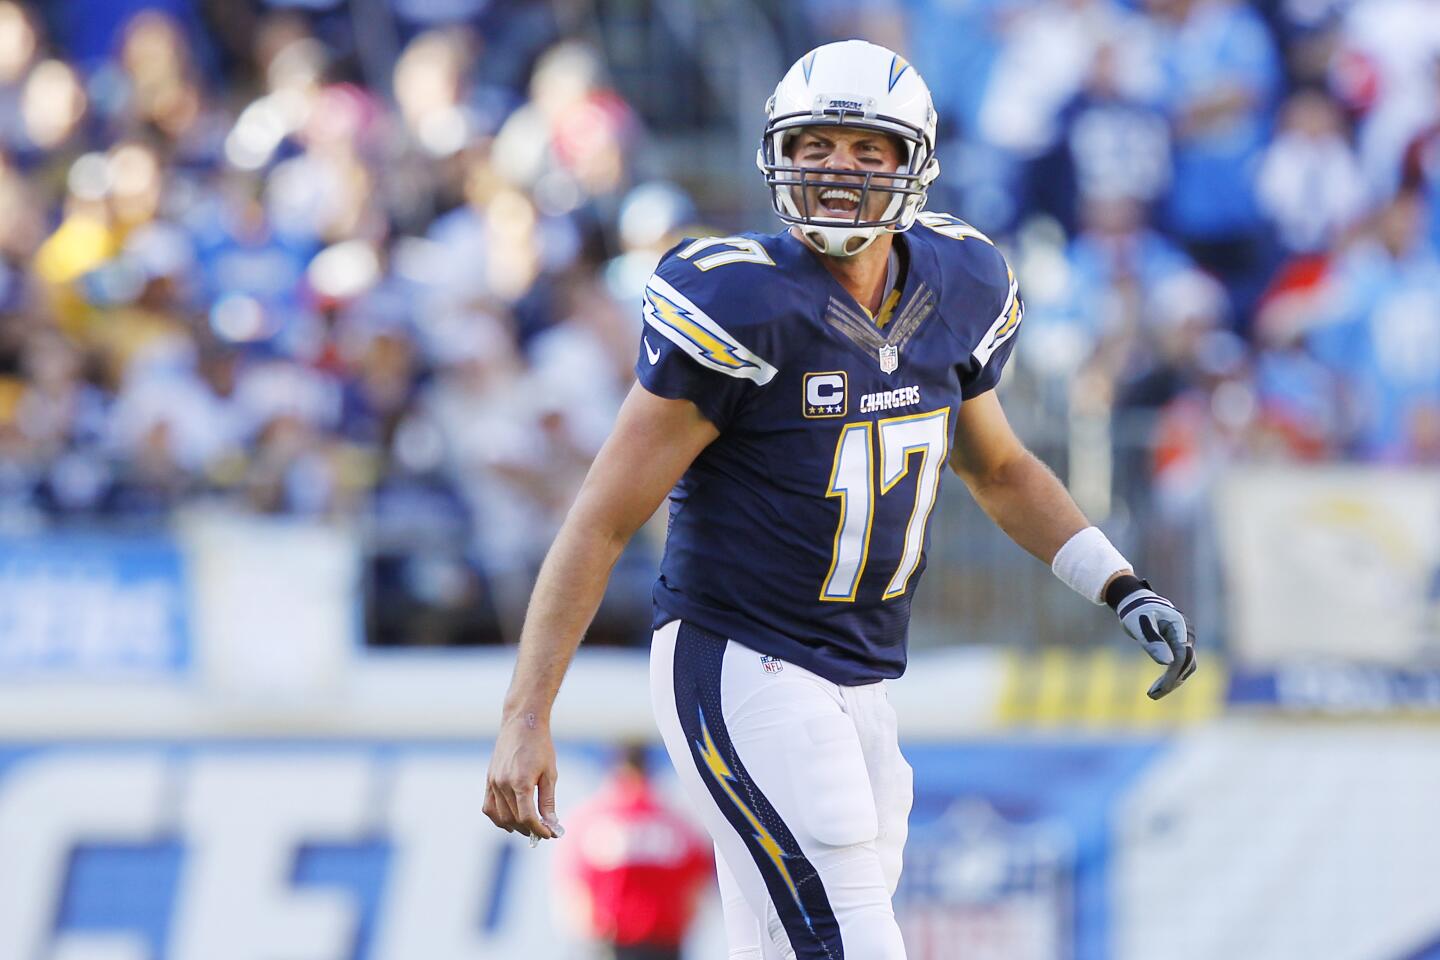 Chargers vs. Broncos 12/14/14